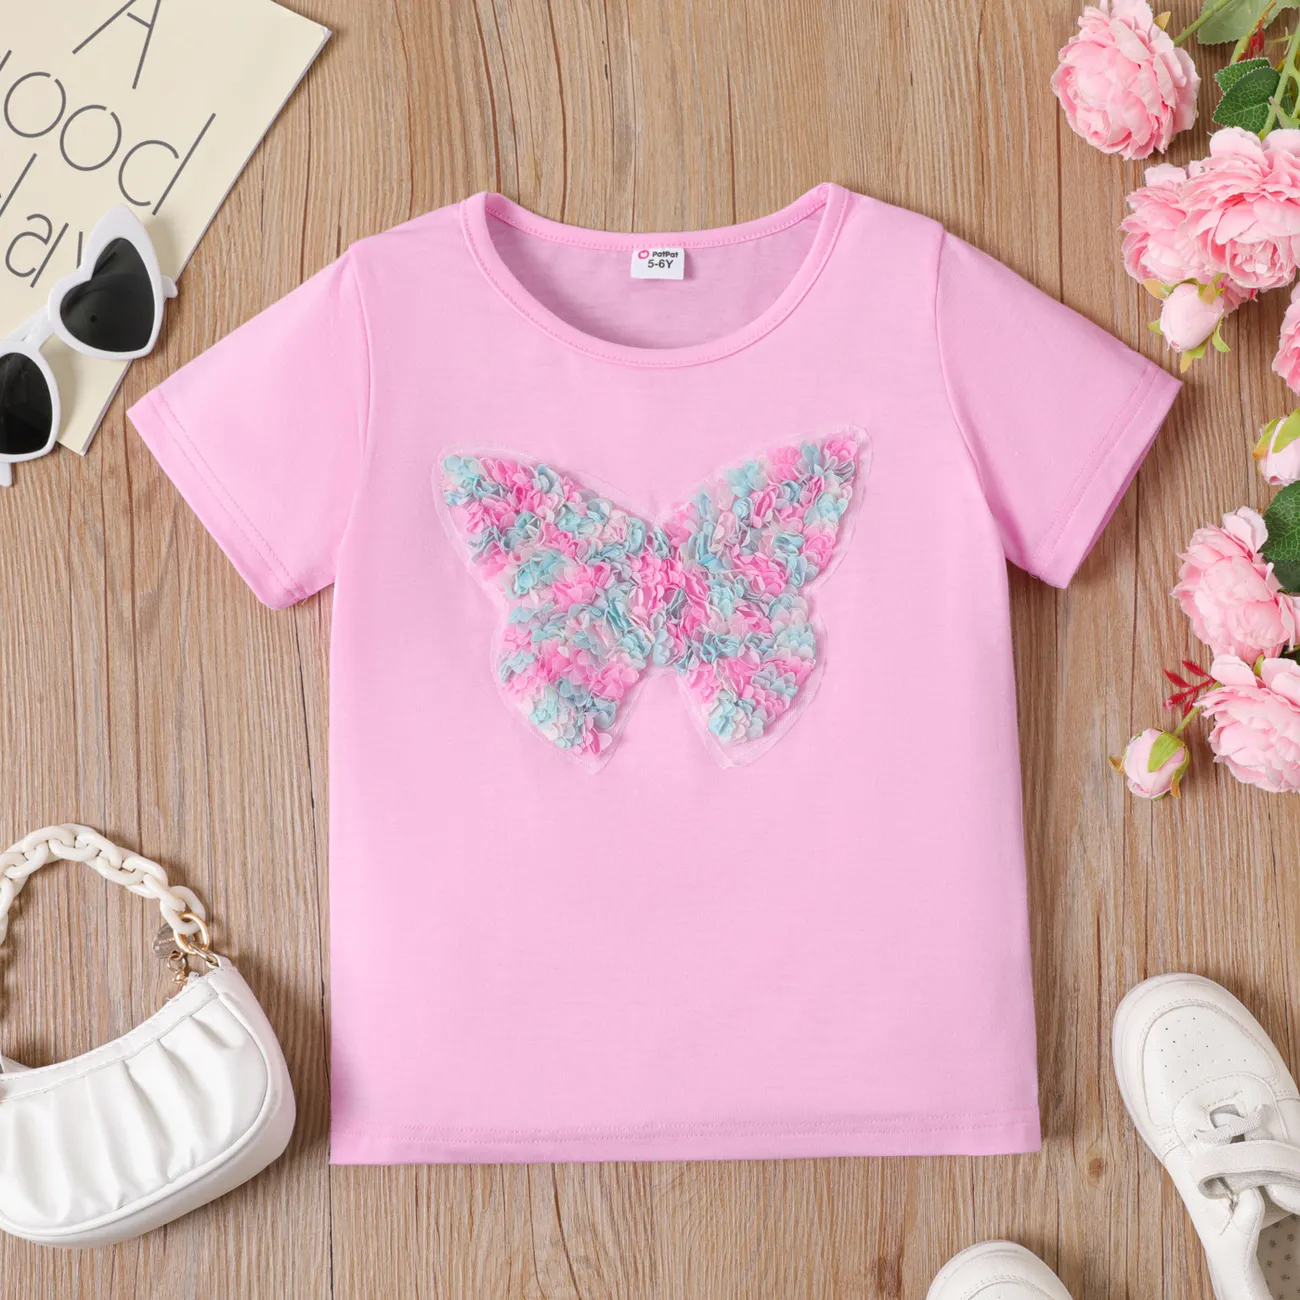 Kid Girl Heart/Butterfly Embroidered Short-sleeve Tee Pink big image 1